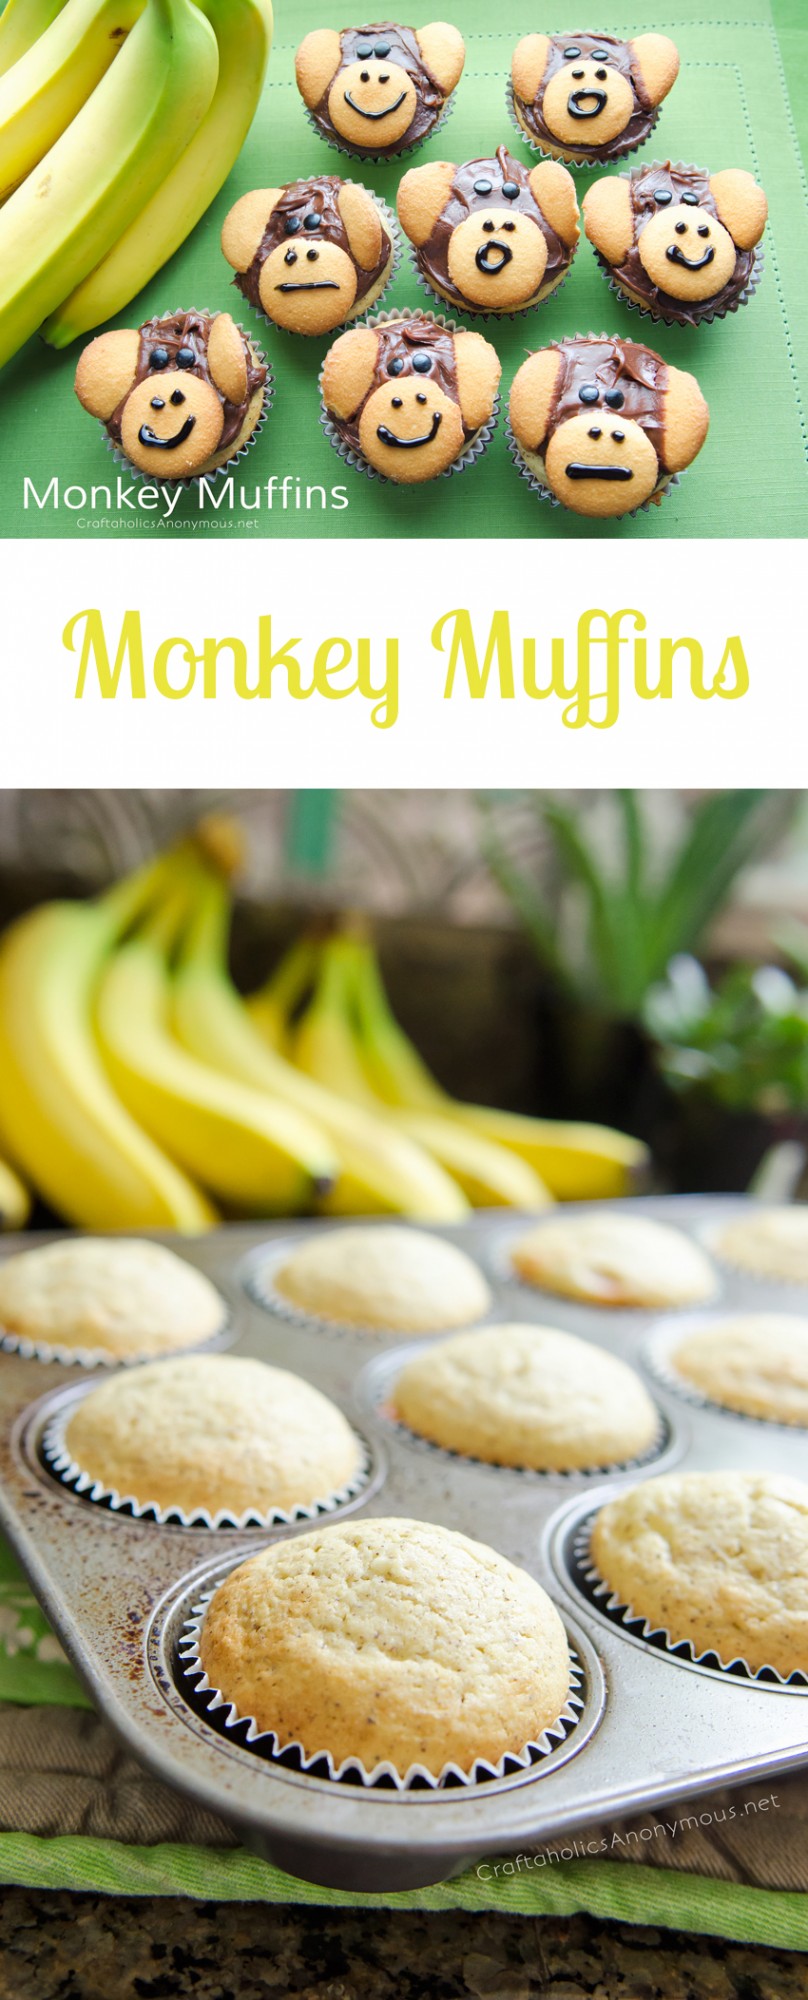 Monkey Muffins || Perfect for a Rainforest themed preschool or snack time for kids!